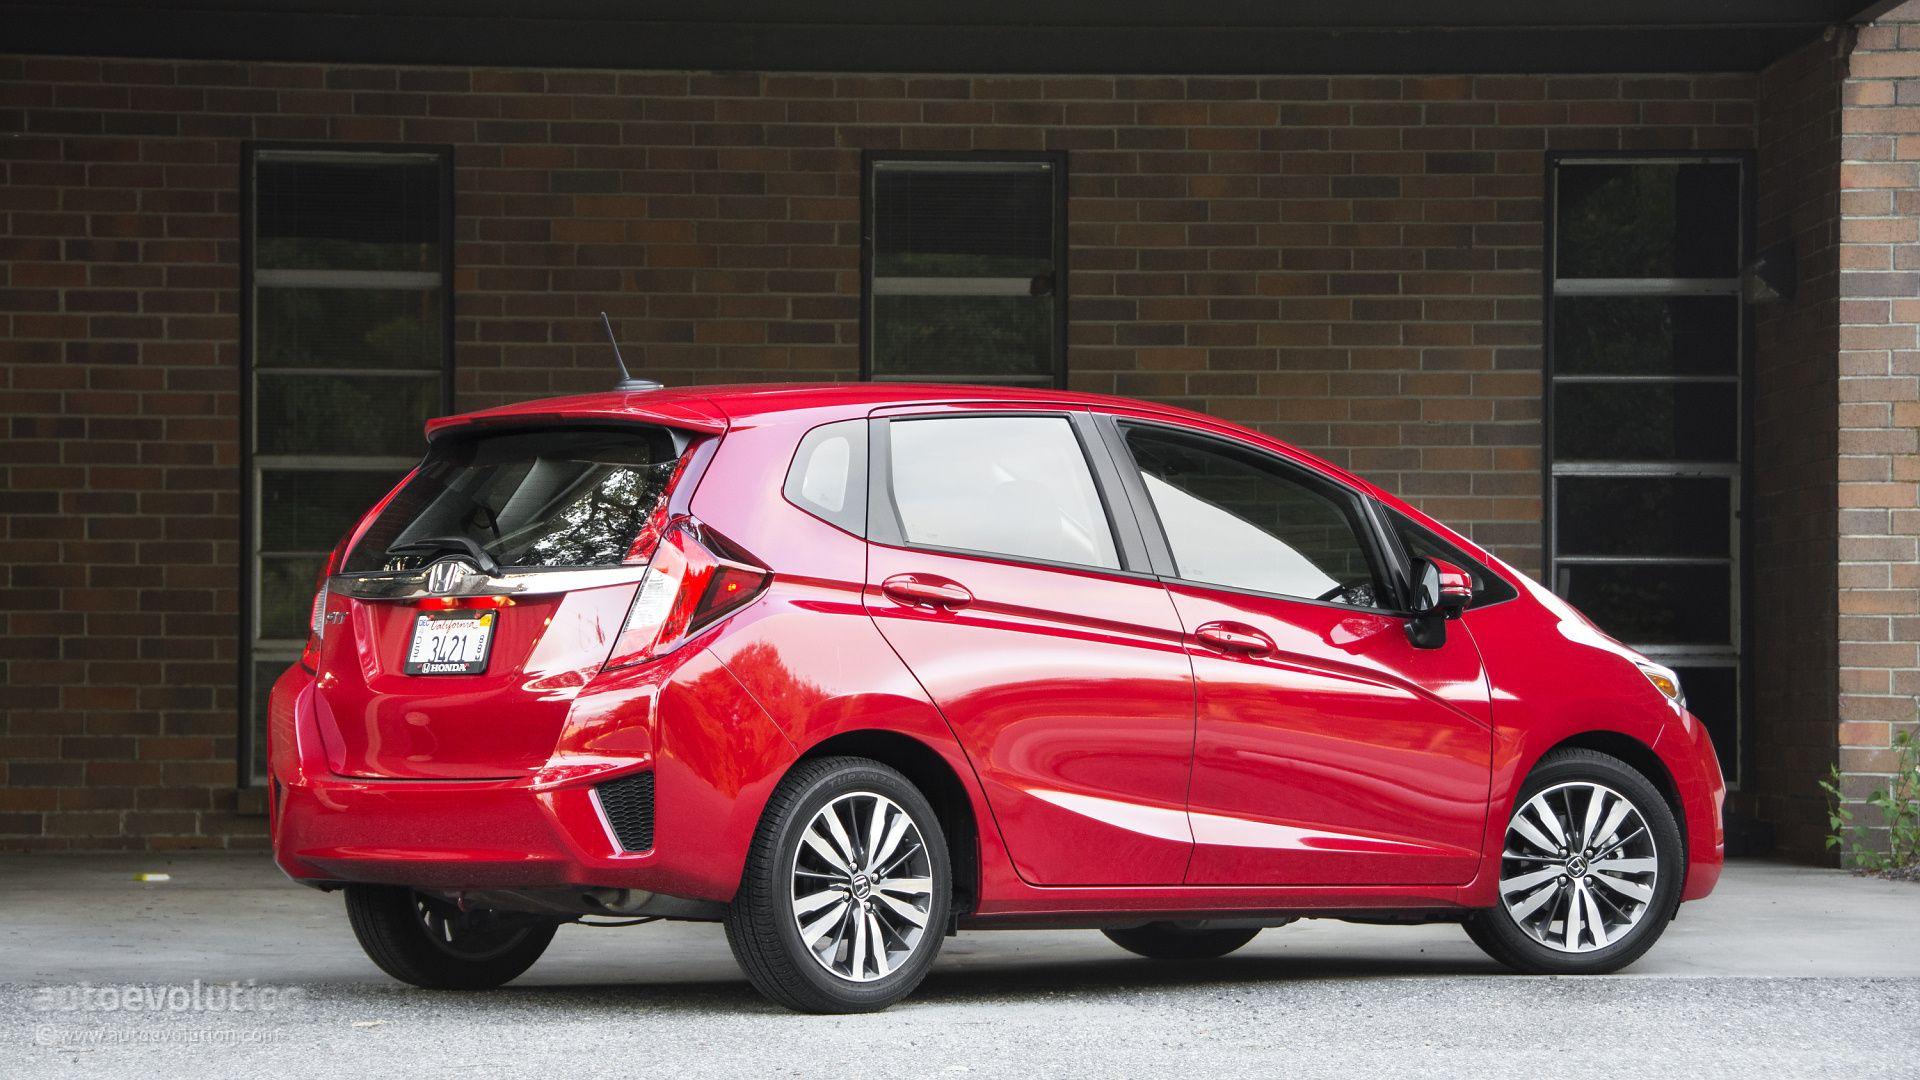 Honda Fit Wallpaper: Fit for a Subcompact King